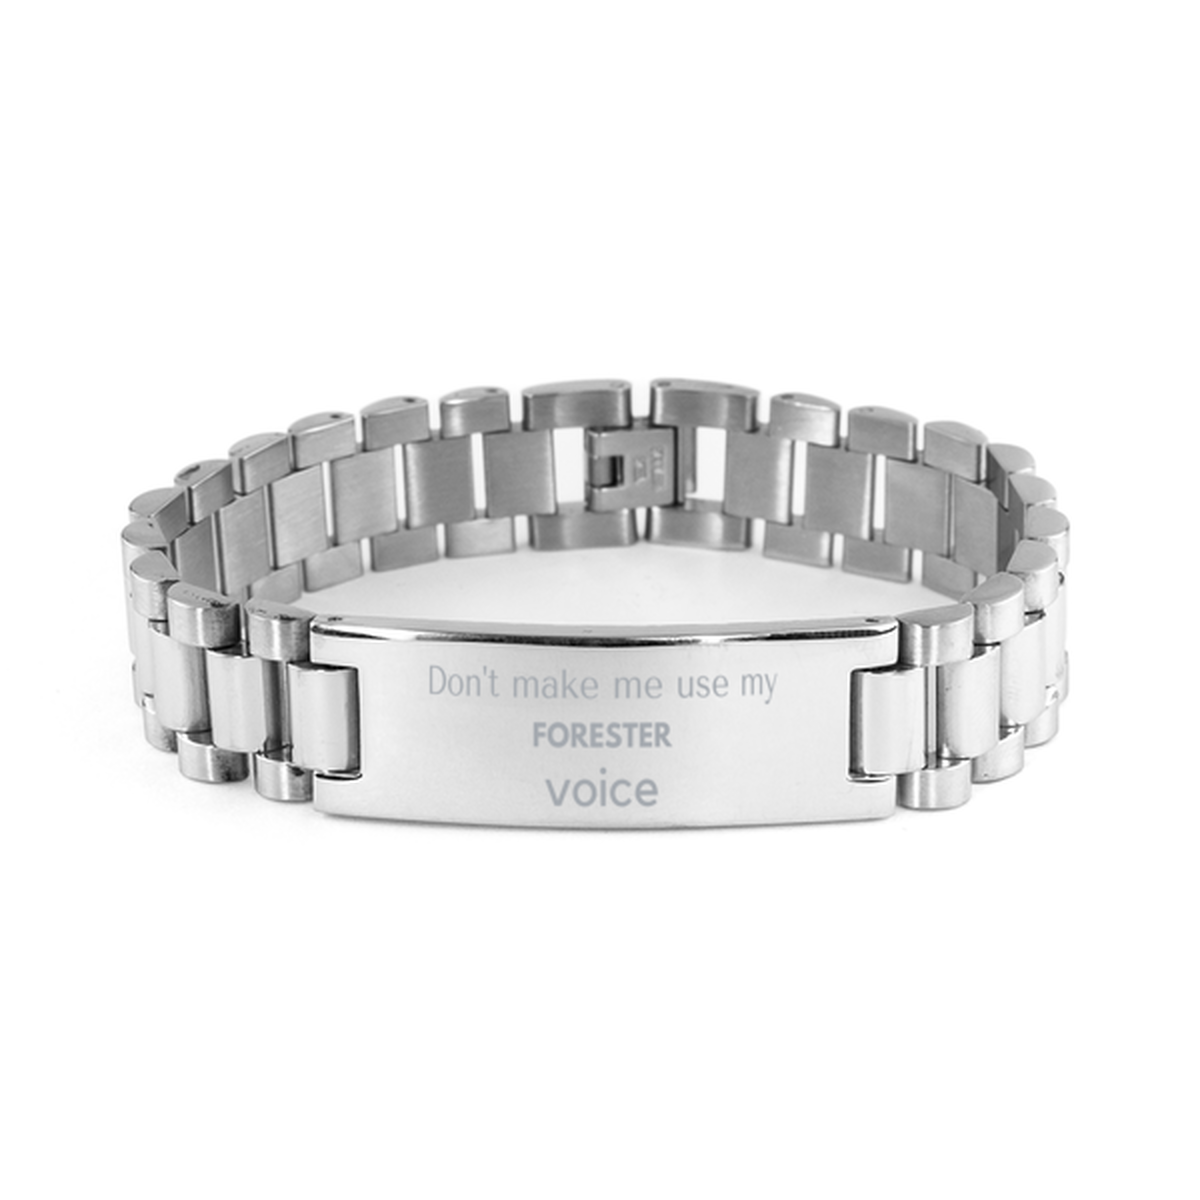 Don't make me use my Forester voice, Sarcasm Forester Gifts, Christmas Forester Ladder Stainless Steel Bracelet Birthday Unique Gifts For Forester Coworkers, Men, Women, Colleague, Friends